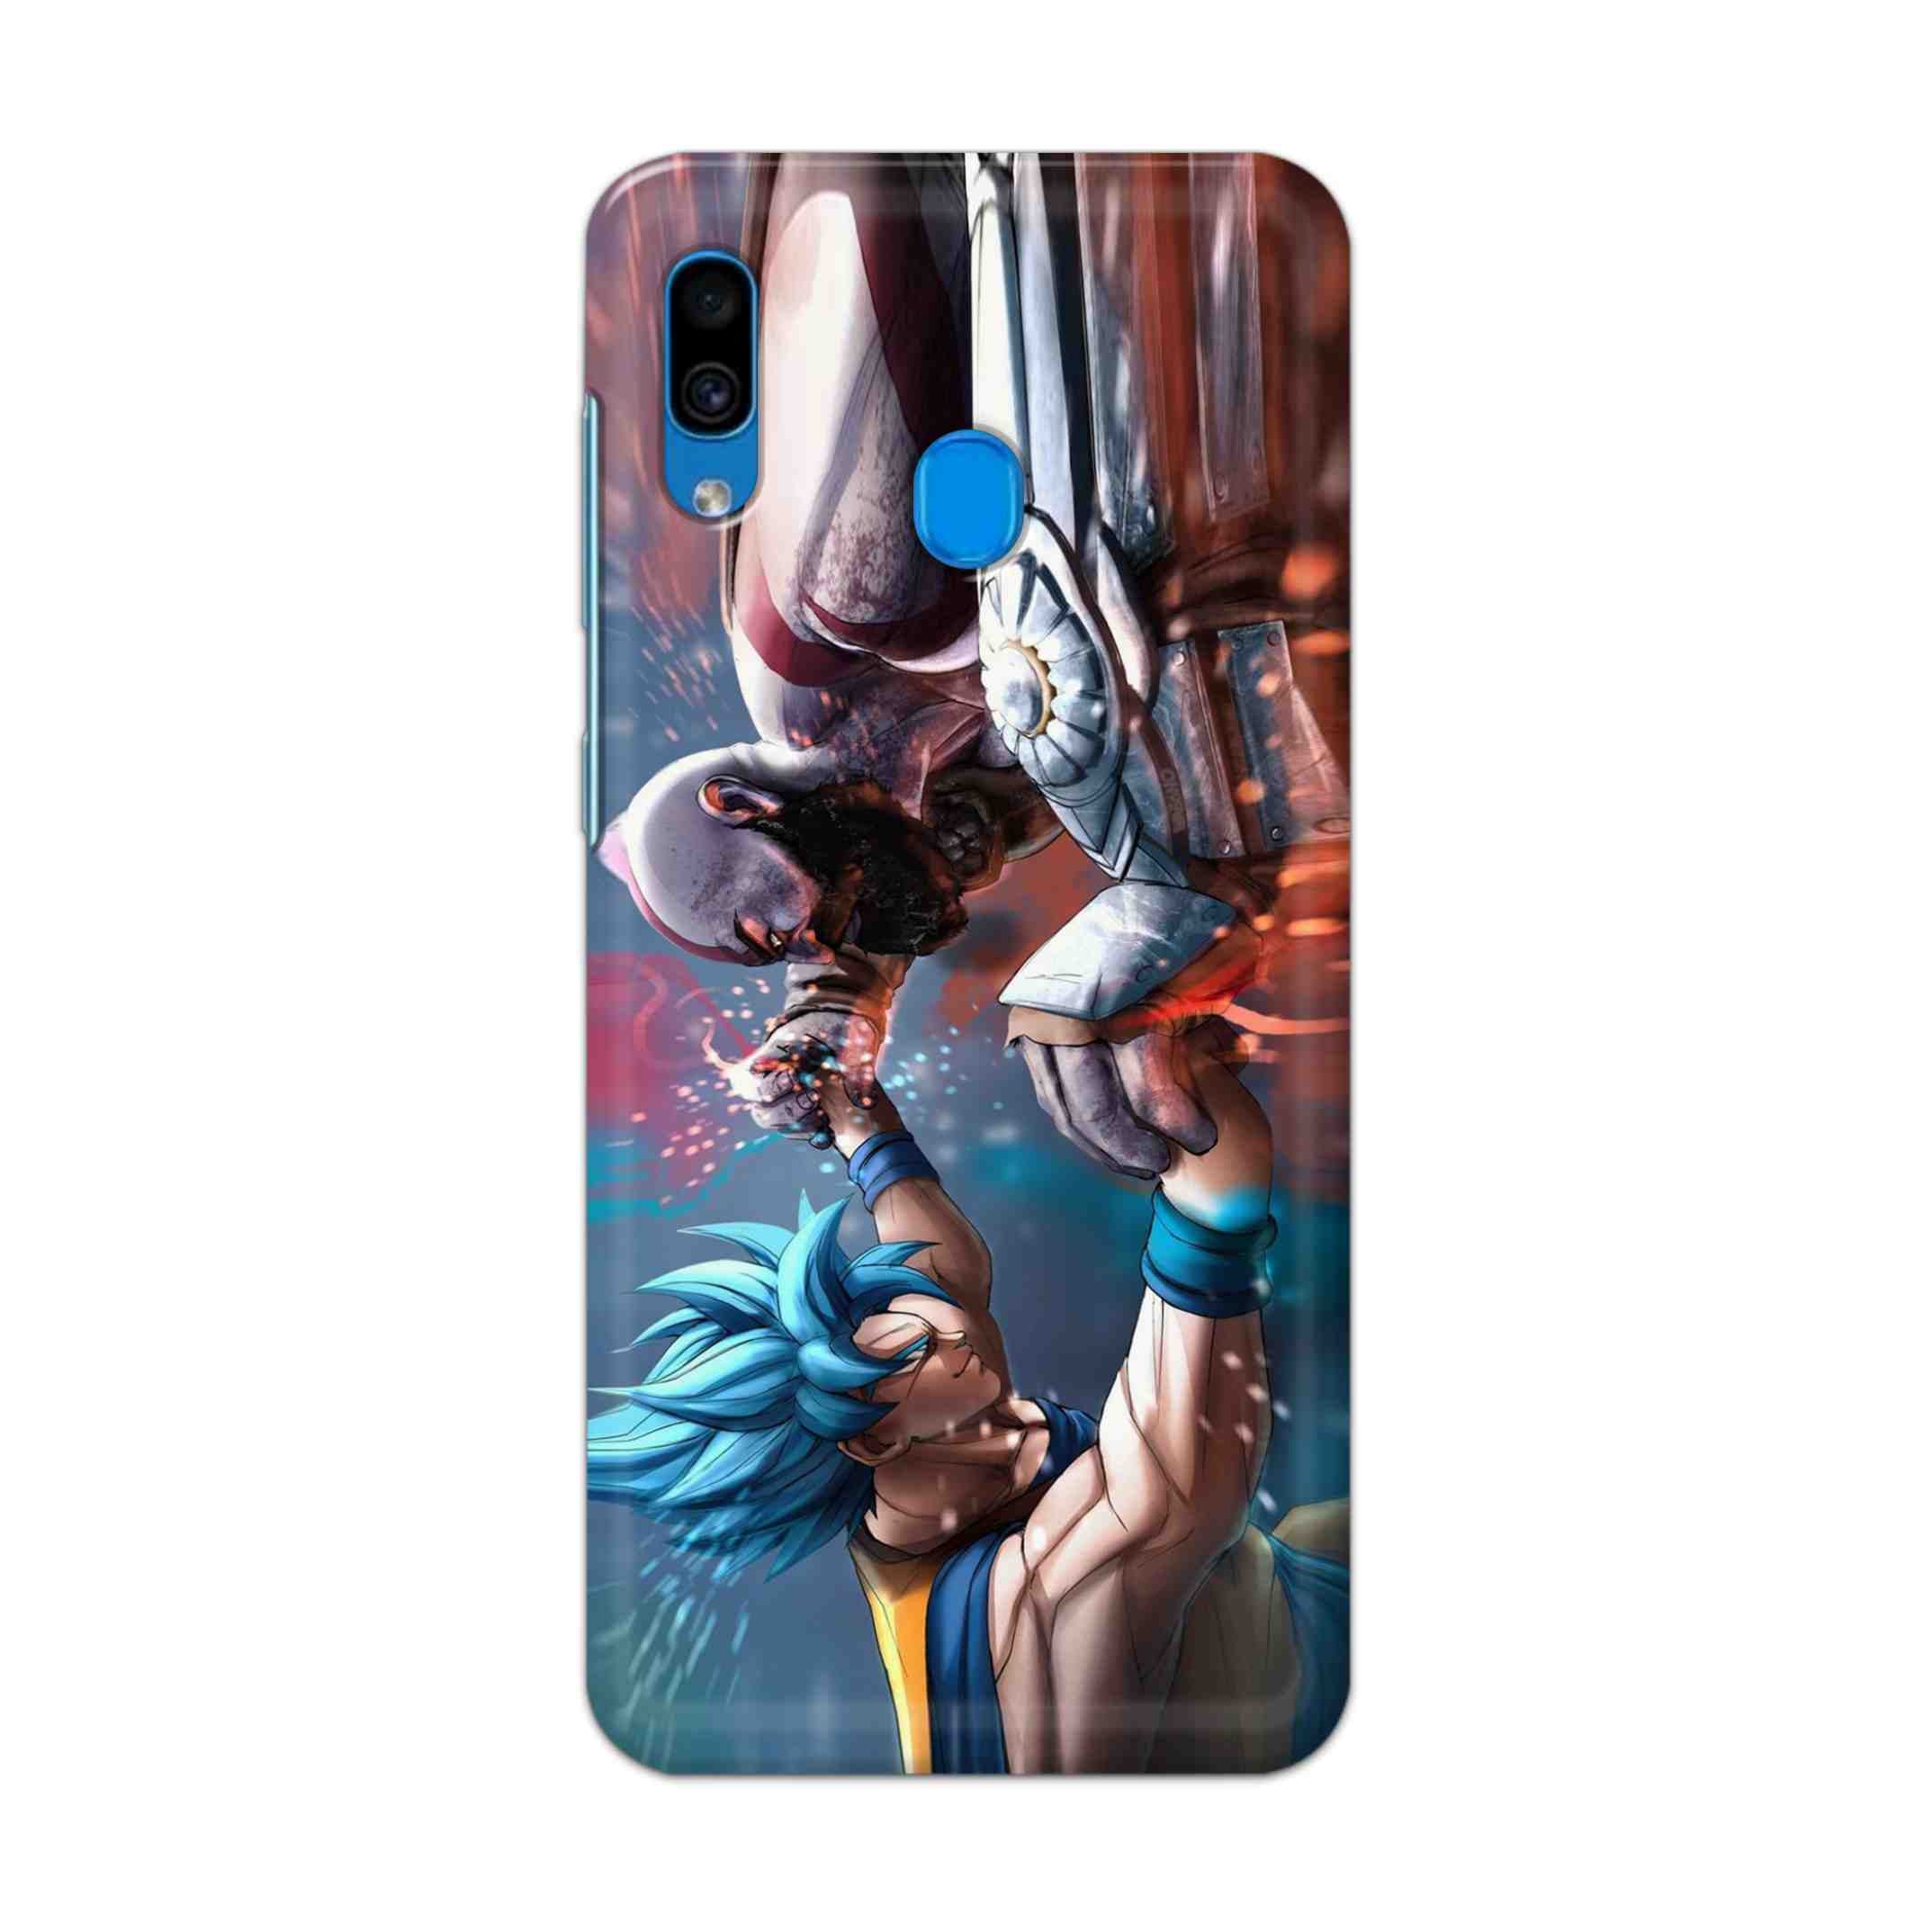 Buy Goku Vs Kratos Hard Back Mobile Phone Case Cover For Samsung Galaxy A30 Online